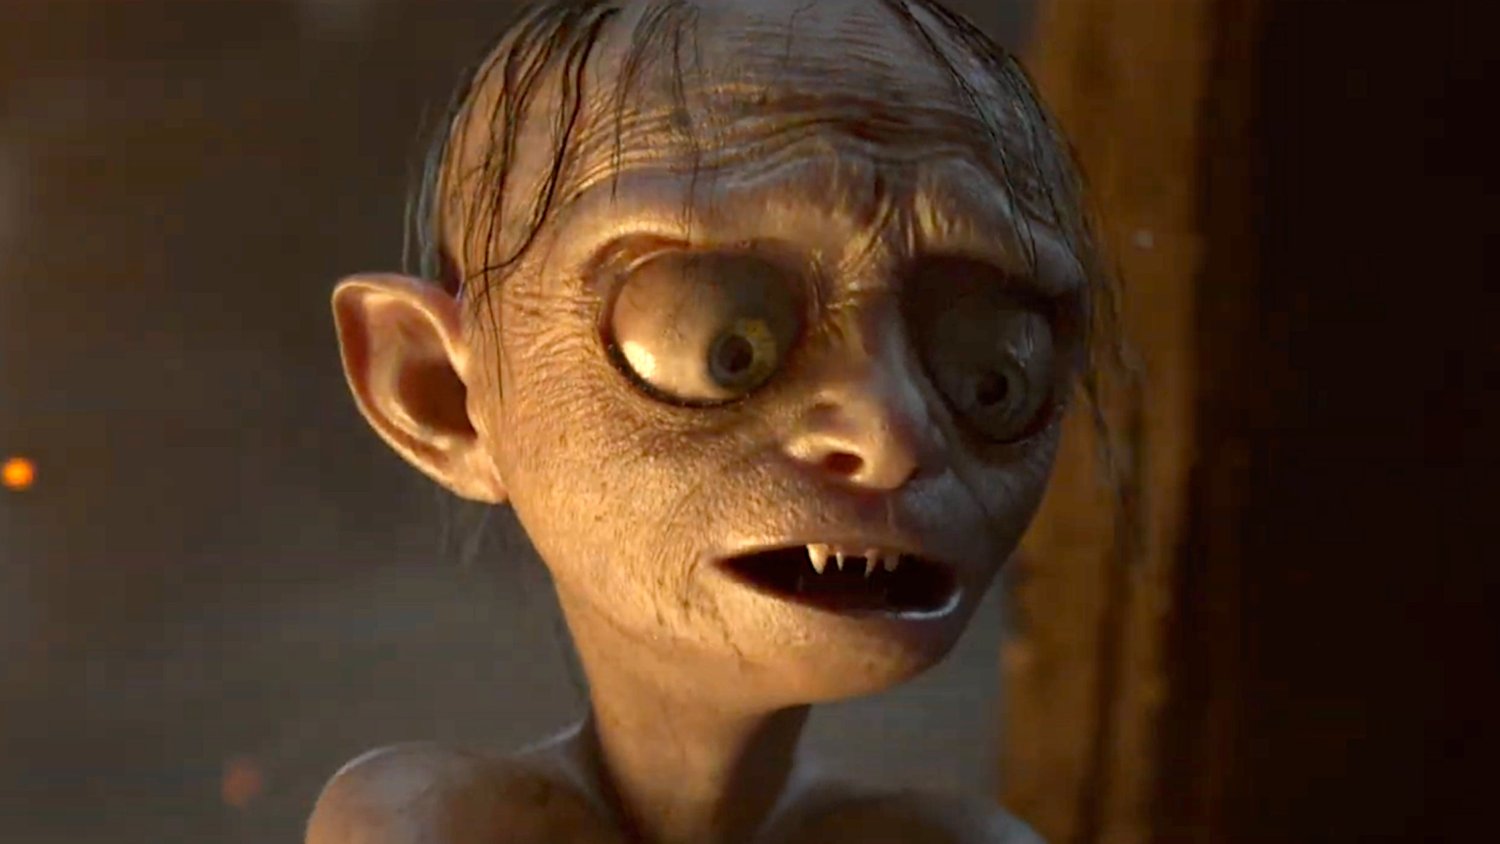 The Lord of the Rings: Gollum (Video Game)